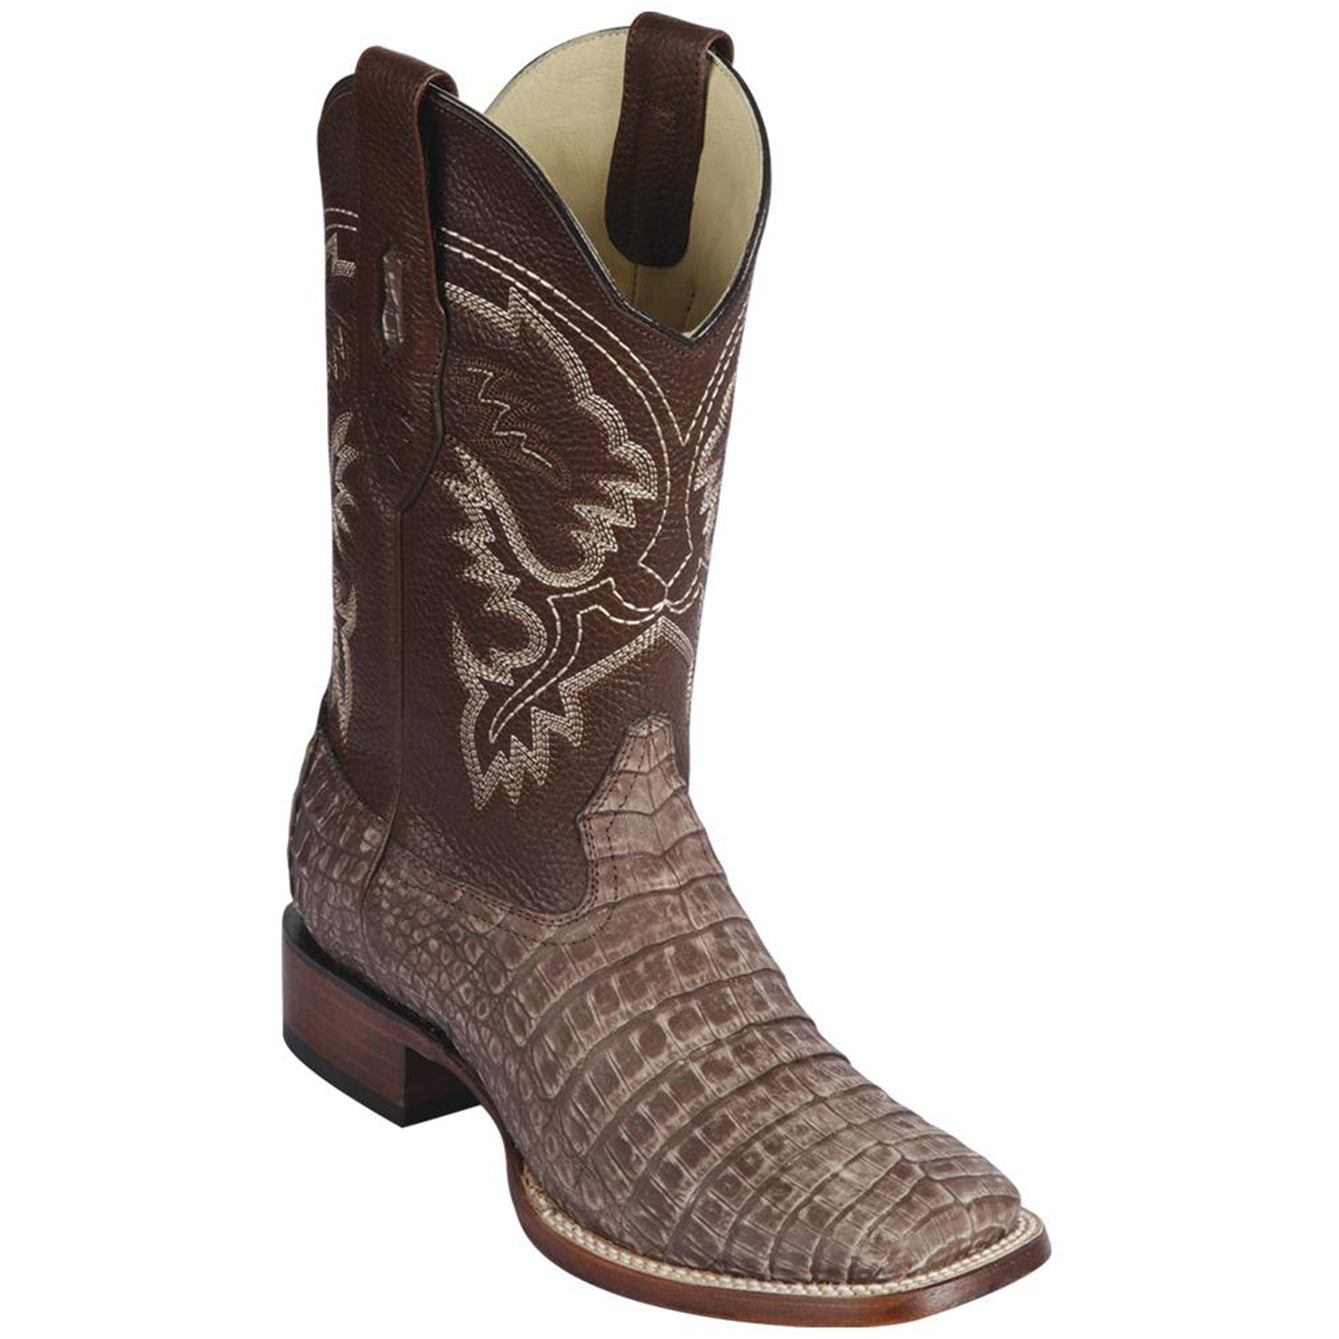 Los Altos Boots - Caiman belly boots square toe